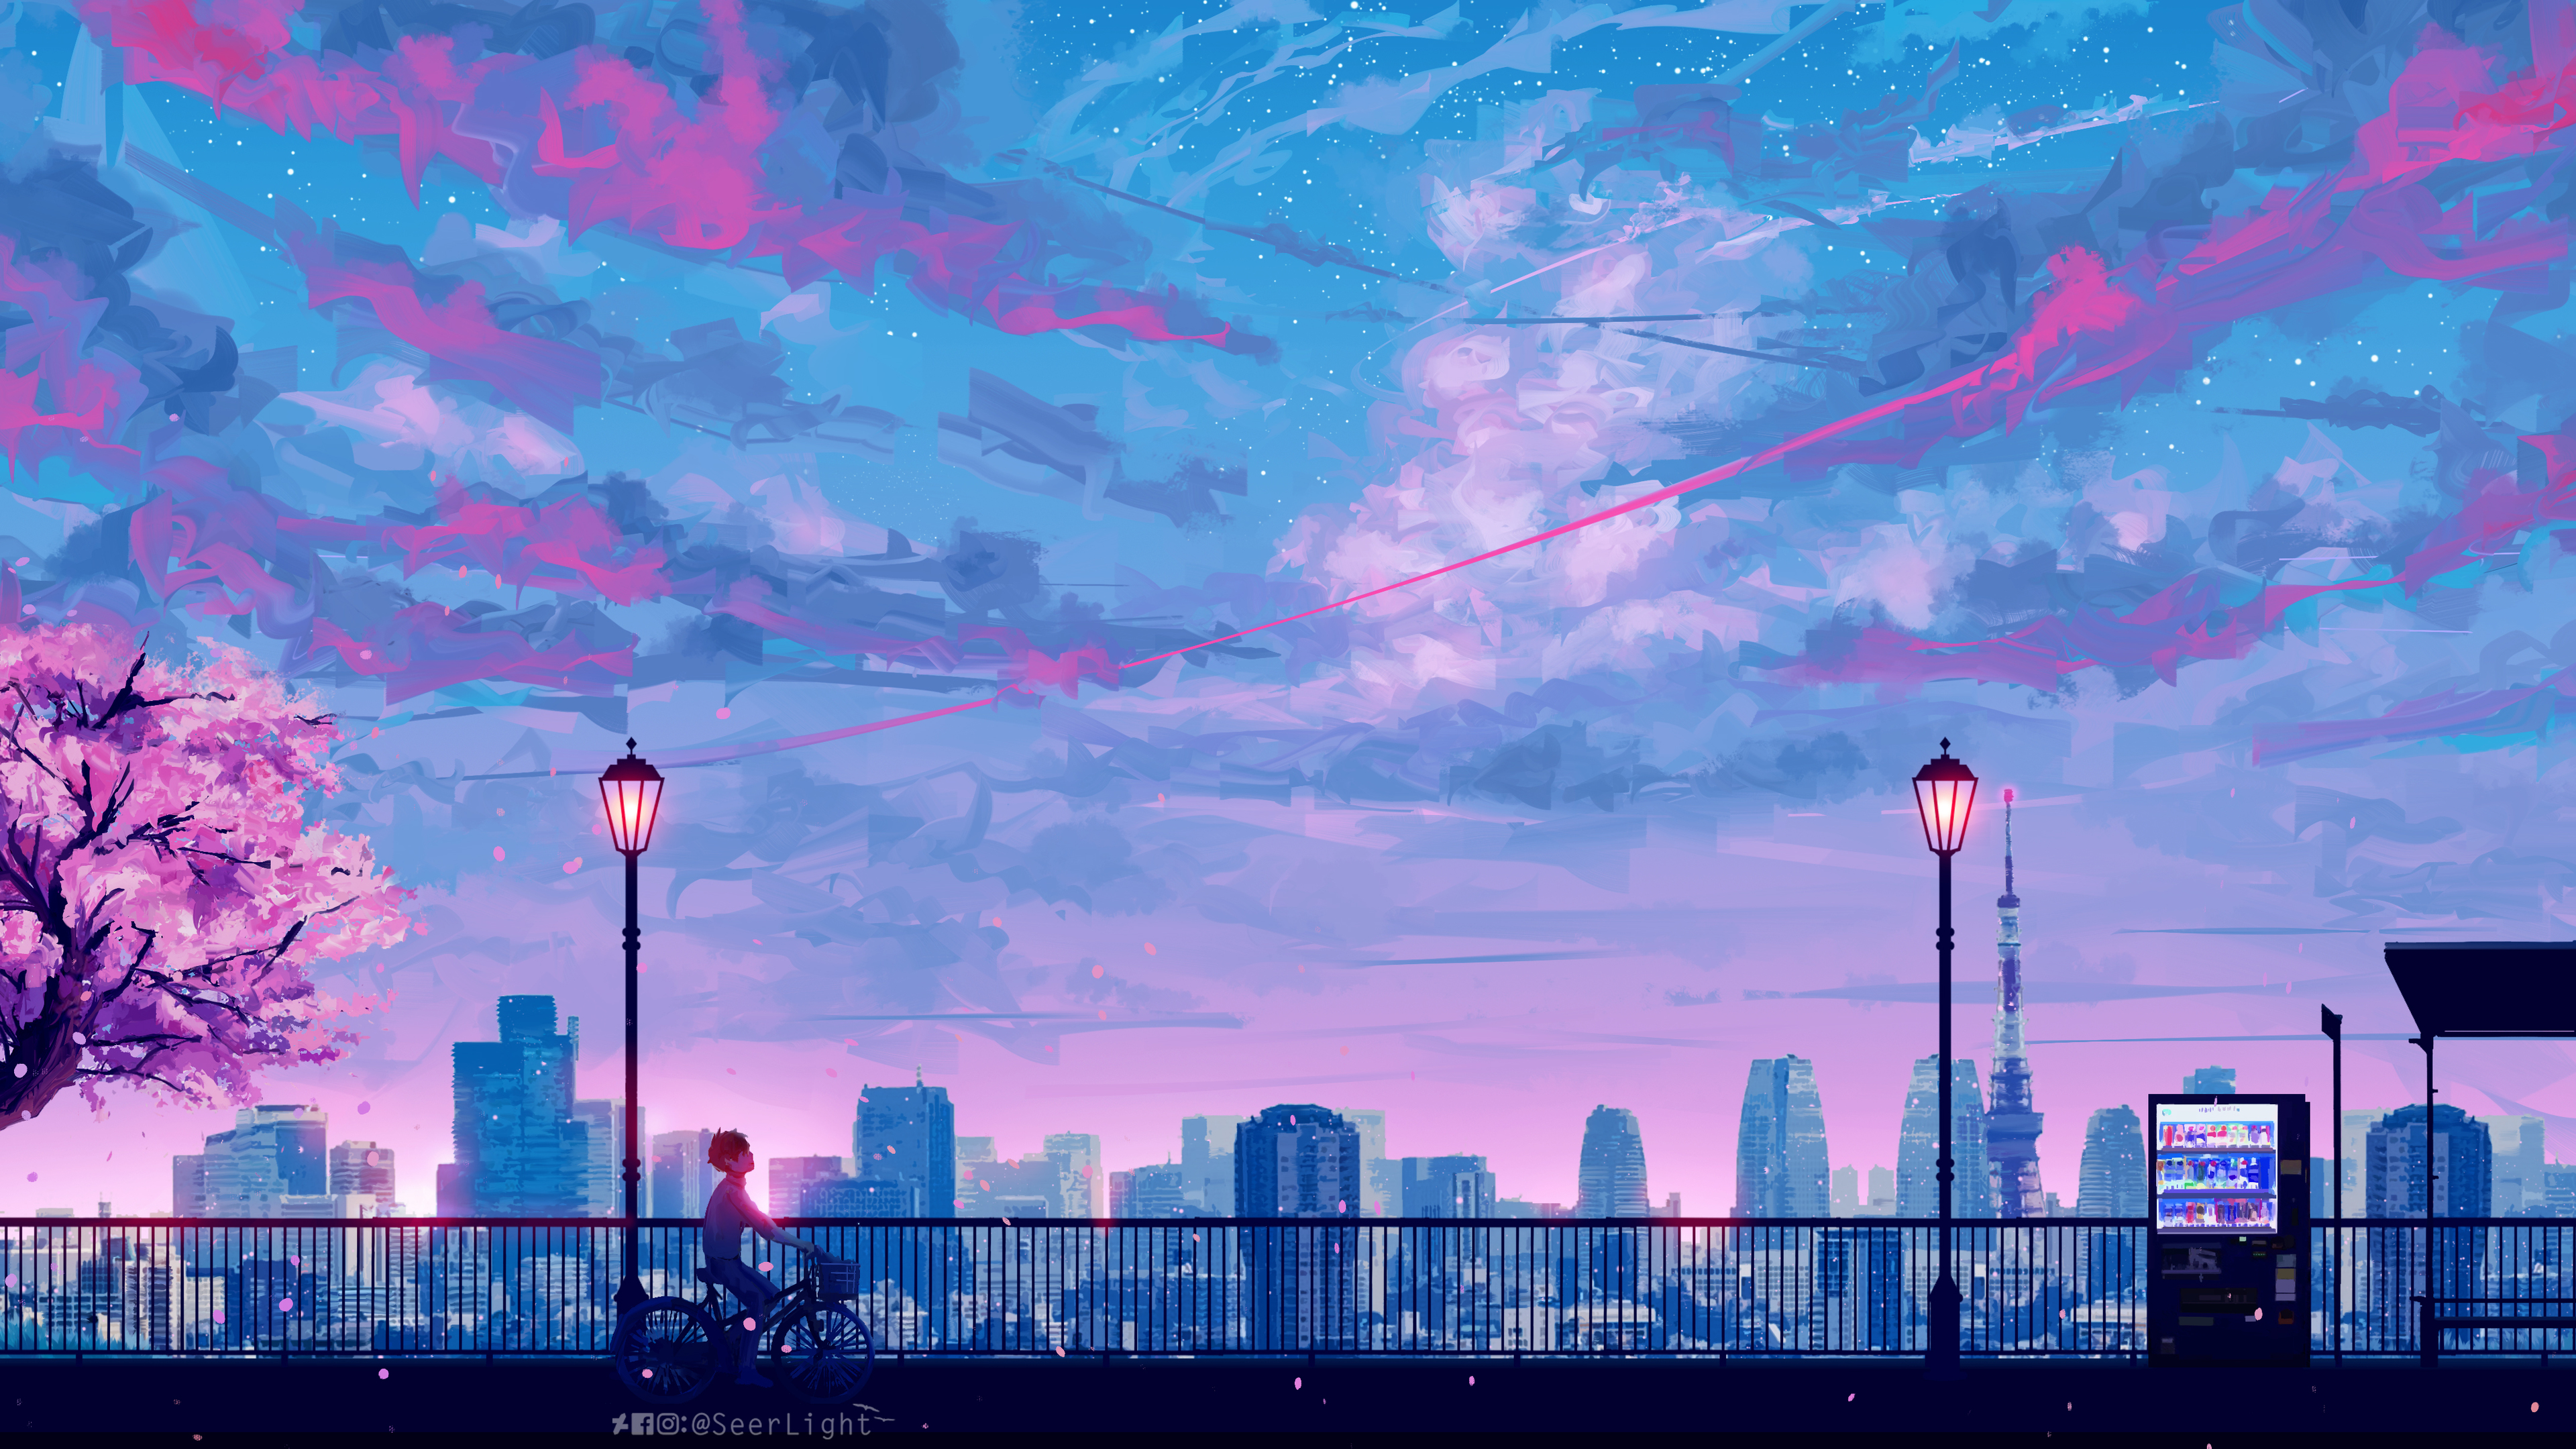 41 Anime Landscape Wallpapers for iPhone and Android by Matthew Gonzales